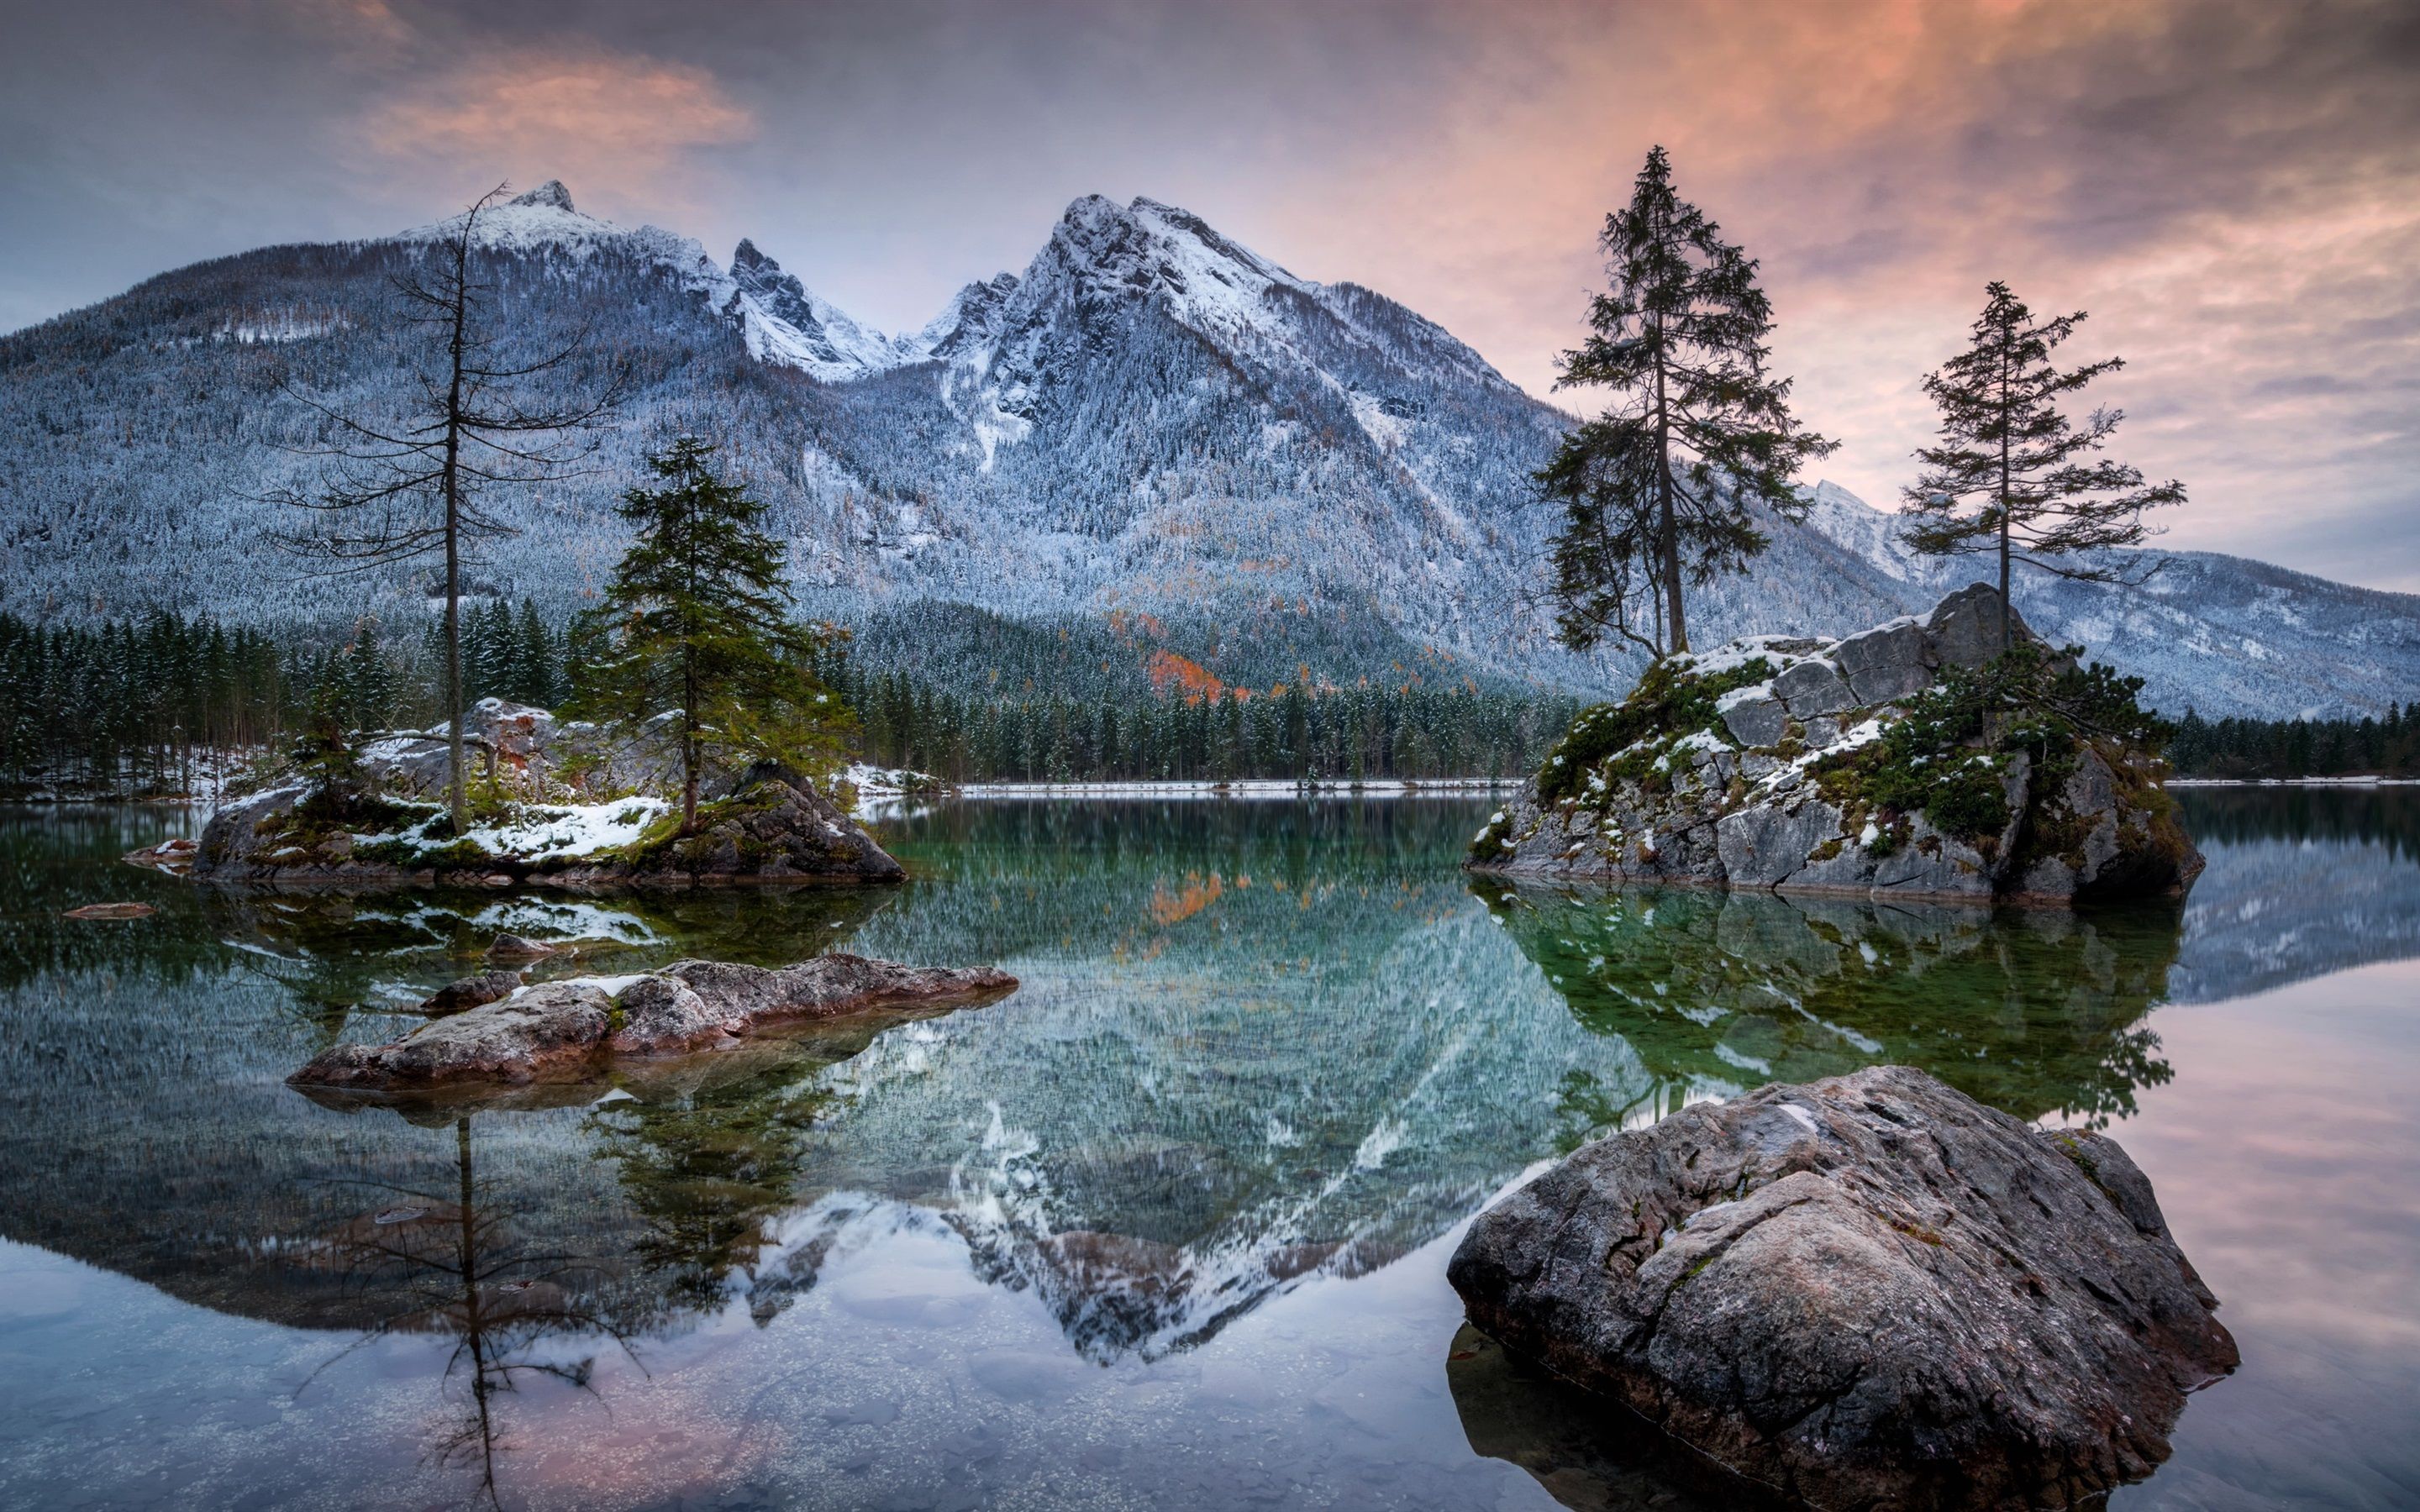 Wallpaper Bayern, Hintersee, lake, mountains, alps, trees, stones, dusk, Germany 2880x1800 HD Picture, Image